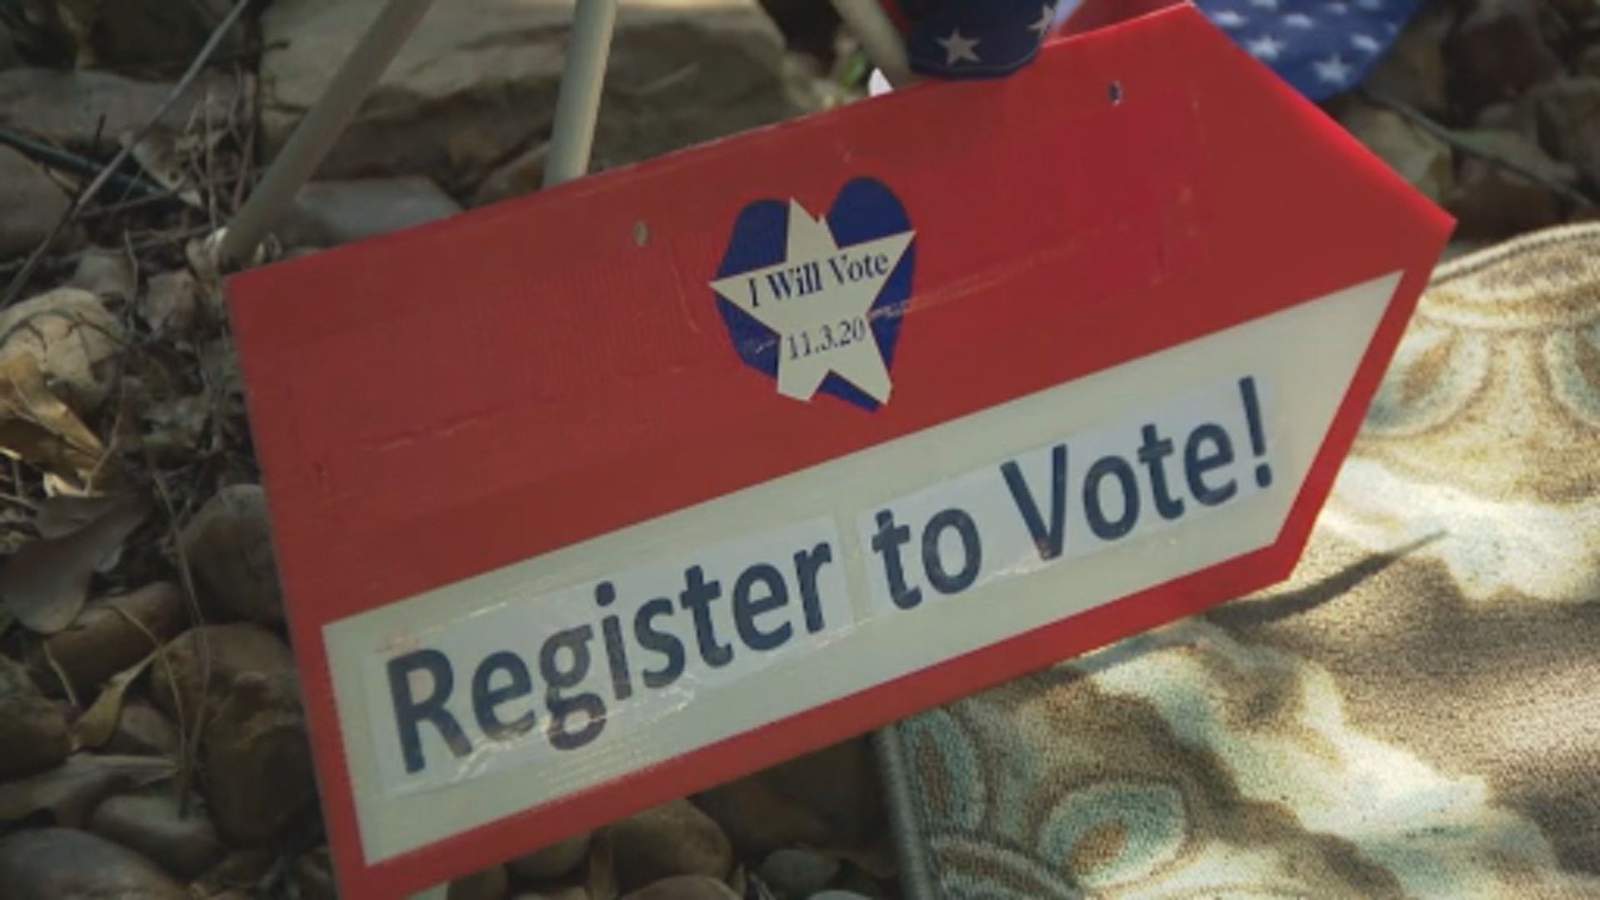 Voter registration push in Harris County 34 days before 2020 presidential election